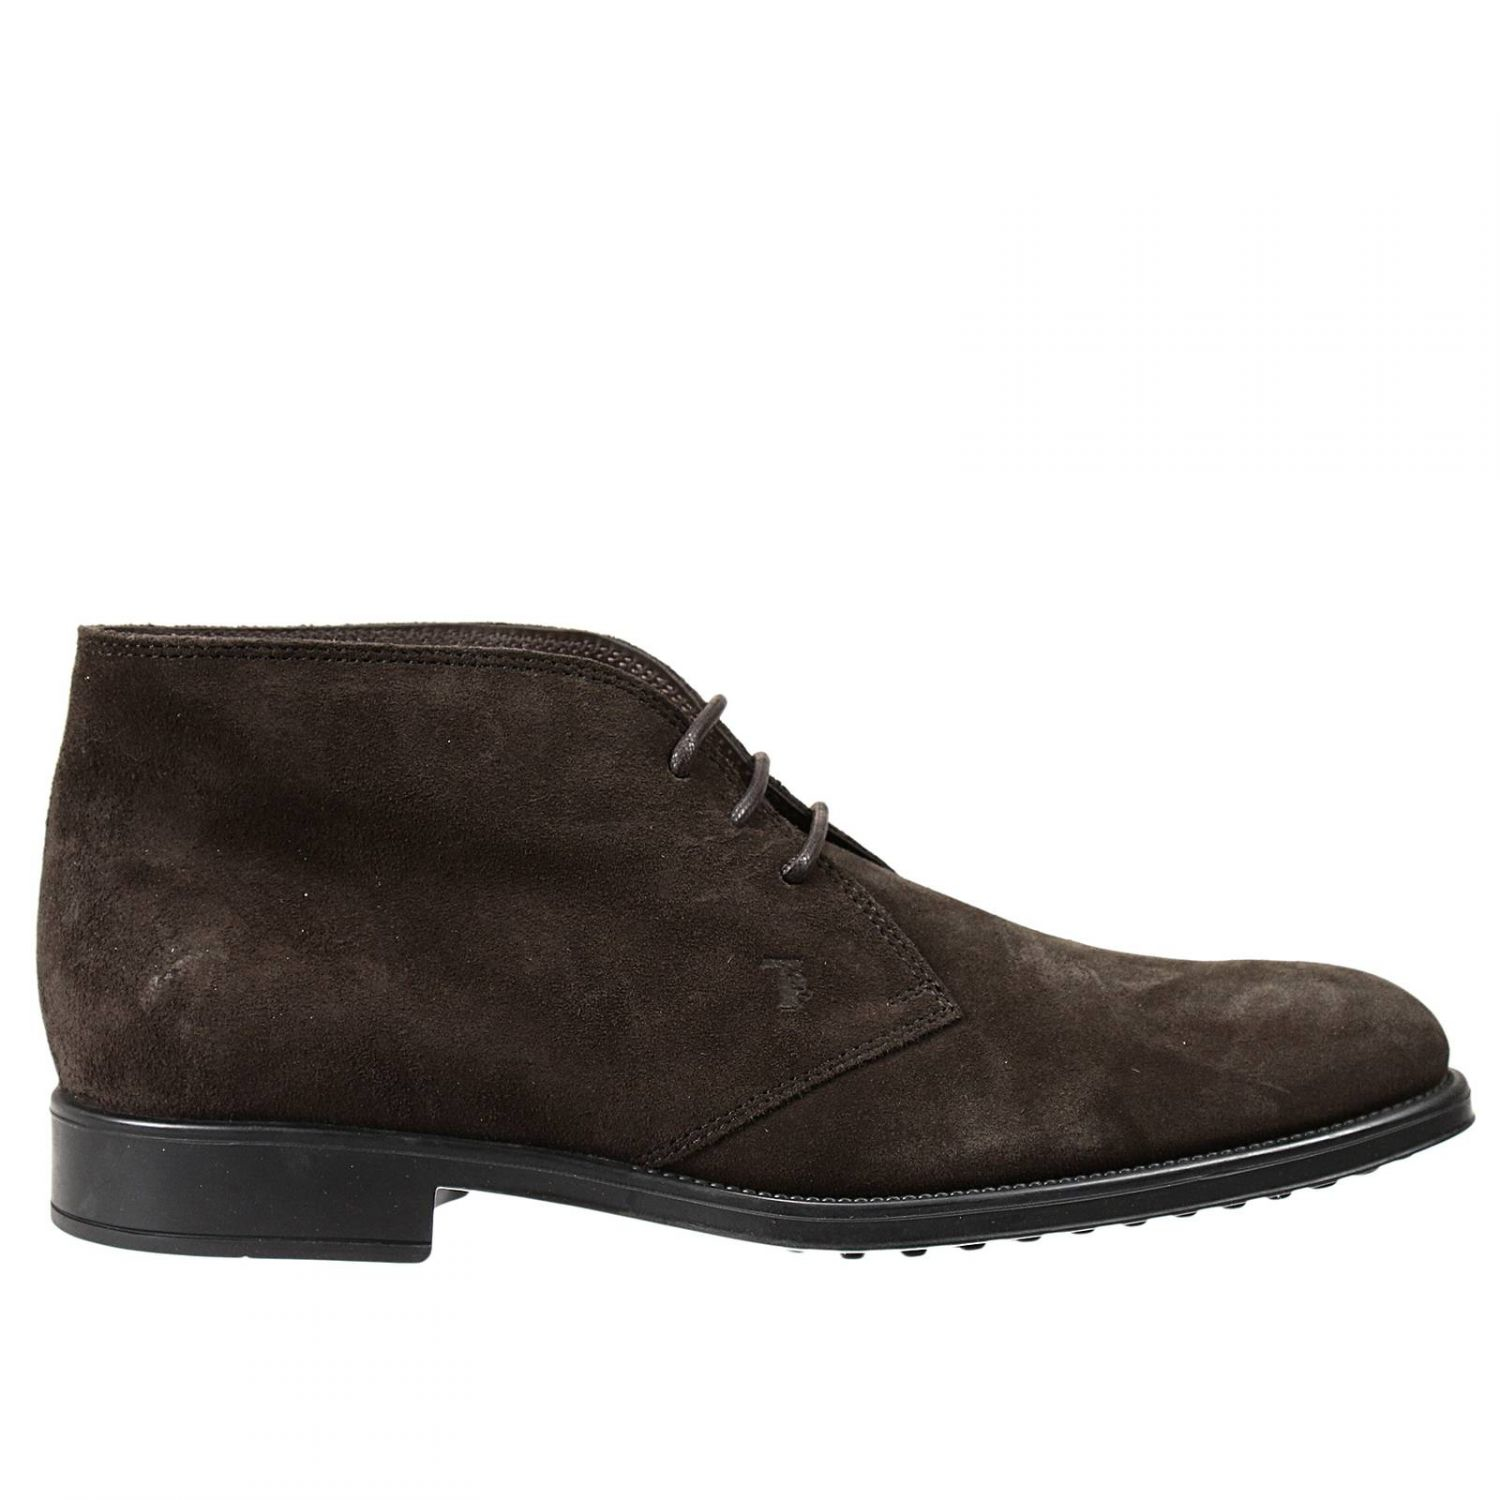 Lyst - Tod's Rubber Sole Ankle Boots In Suede in Brown for Men